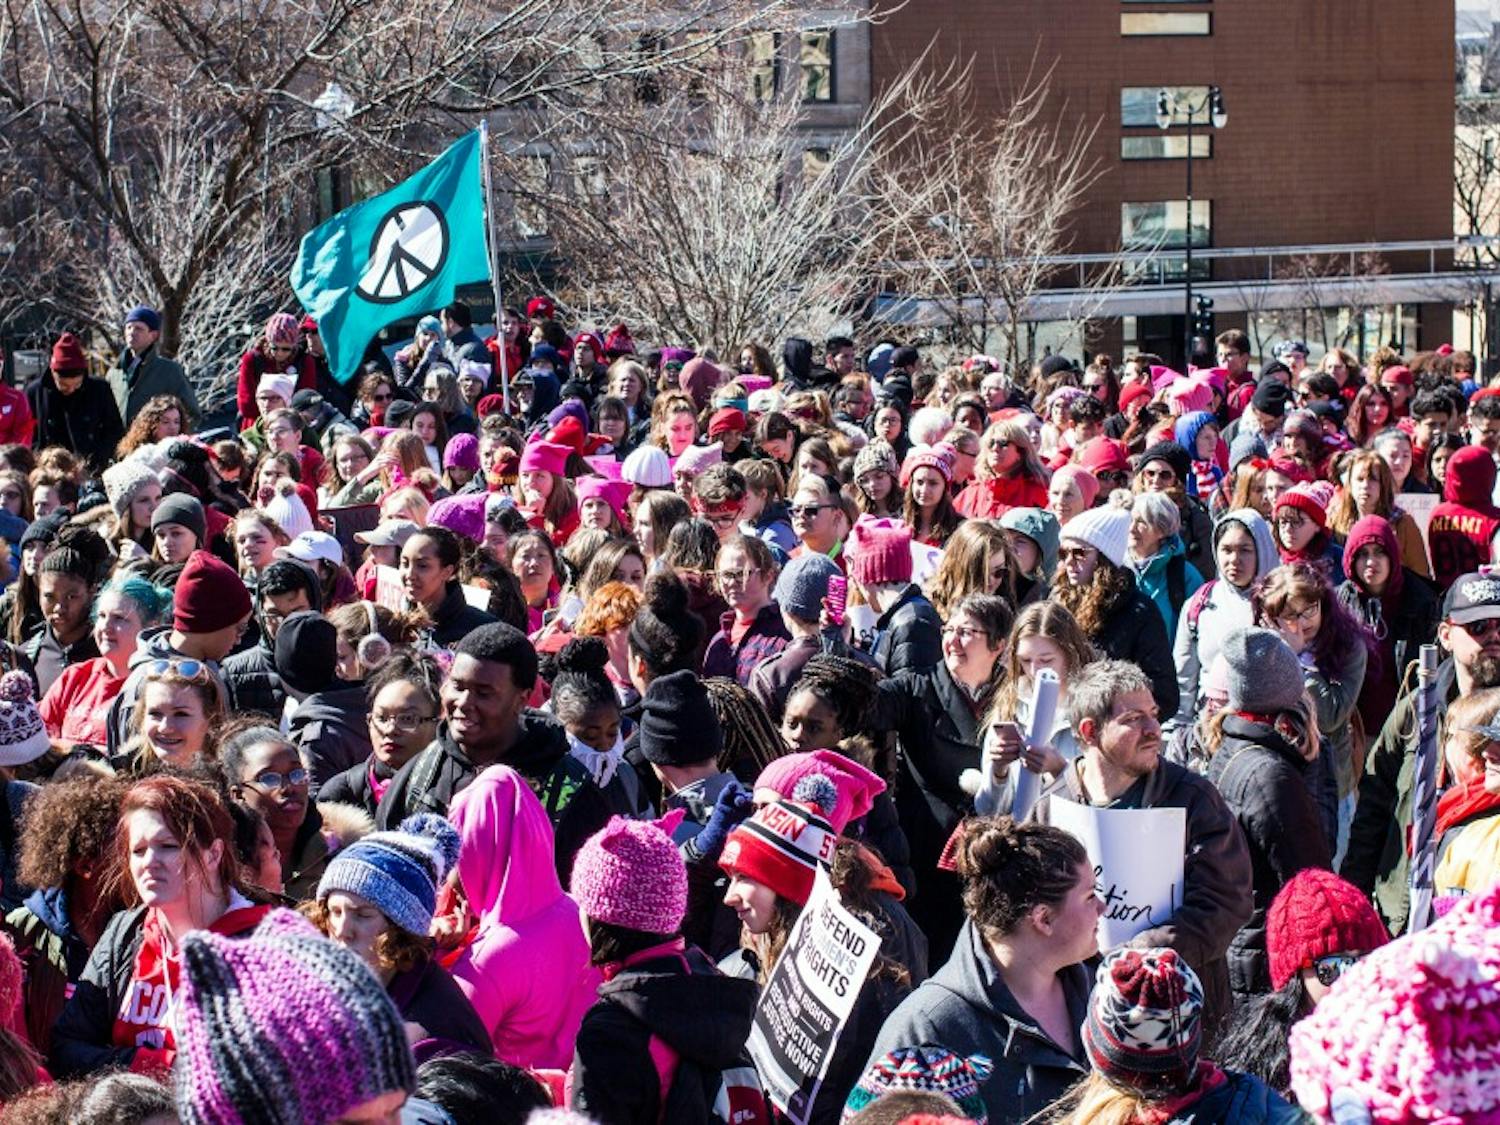 Hundreds of protesters swarmed the Capitol Wednesday to voice support for the rights of women and other marginalized people.